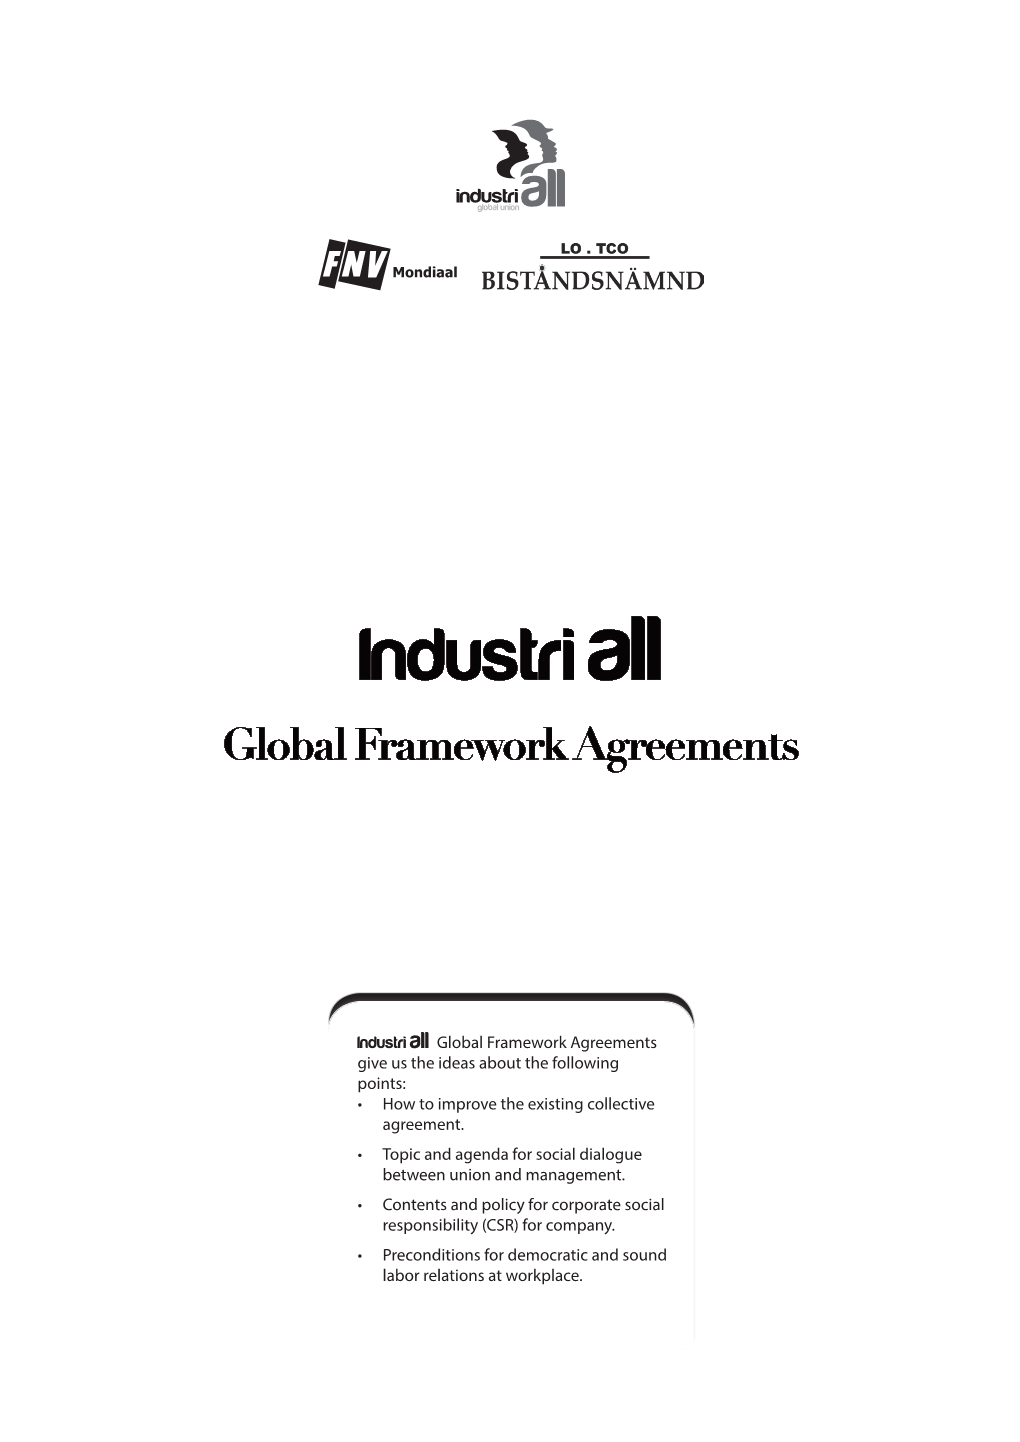 Industri All Global Framework Agreements Give Us the Ideas About the Following Points: T How to Improve the Existing Collective Agreement